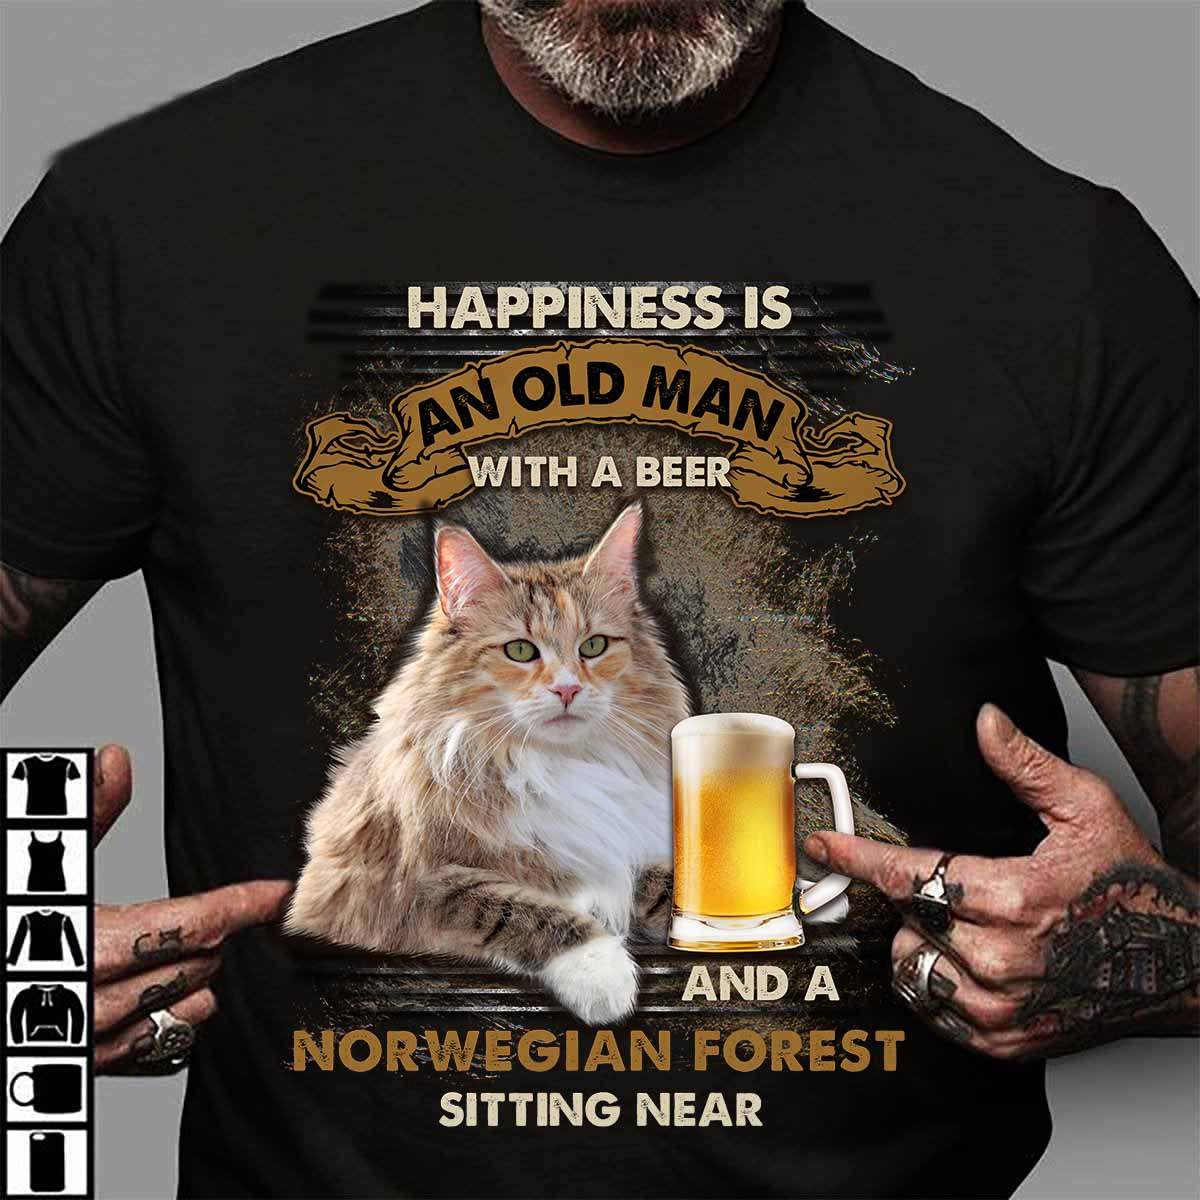 Happiness is an old man with a beer and a Norwegian forest sitting near